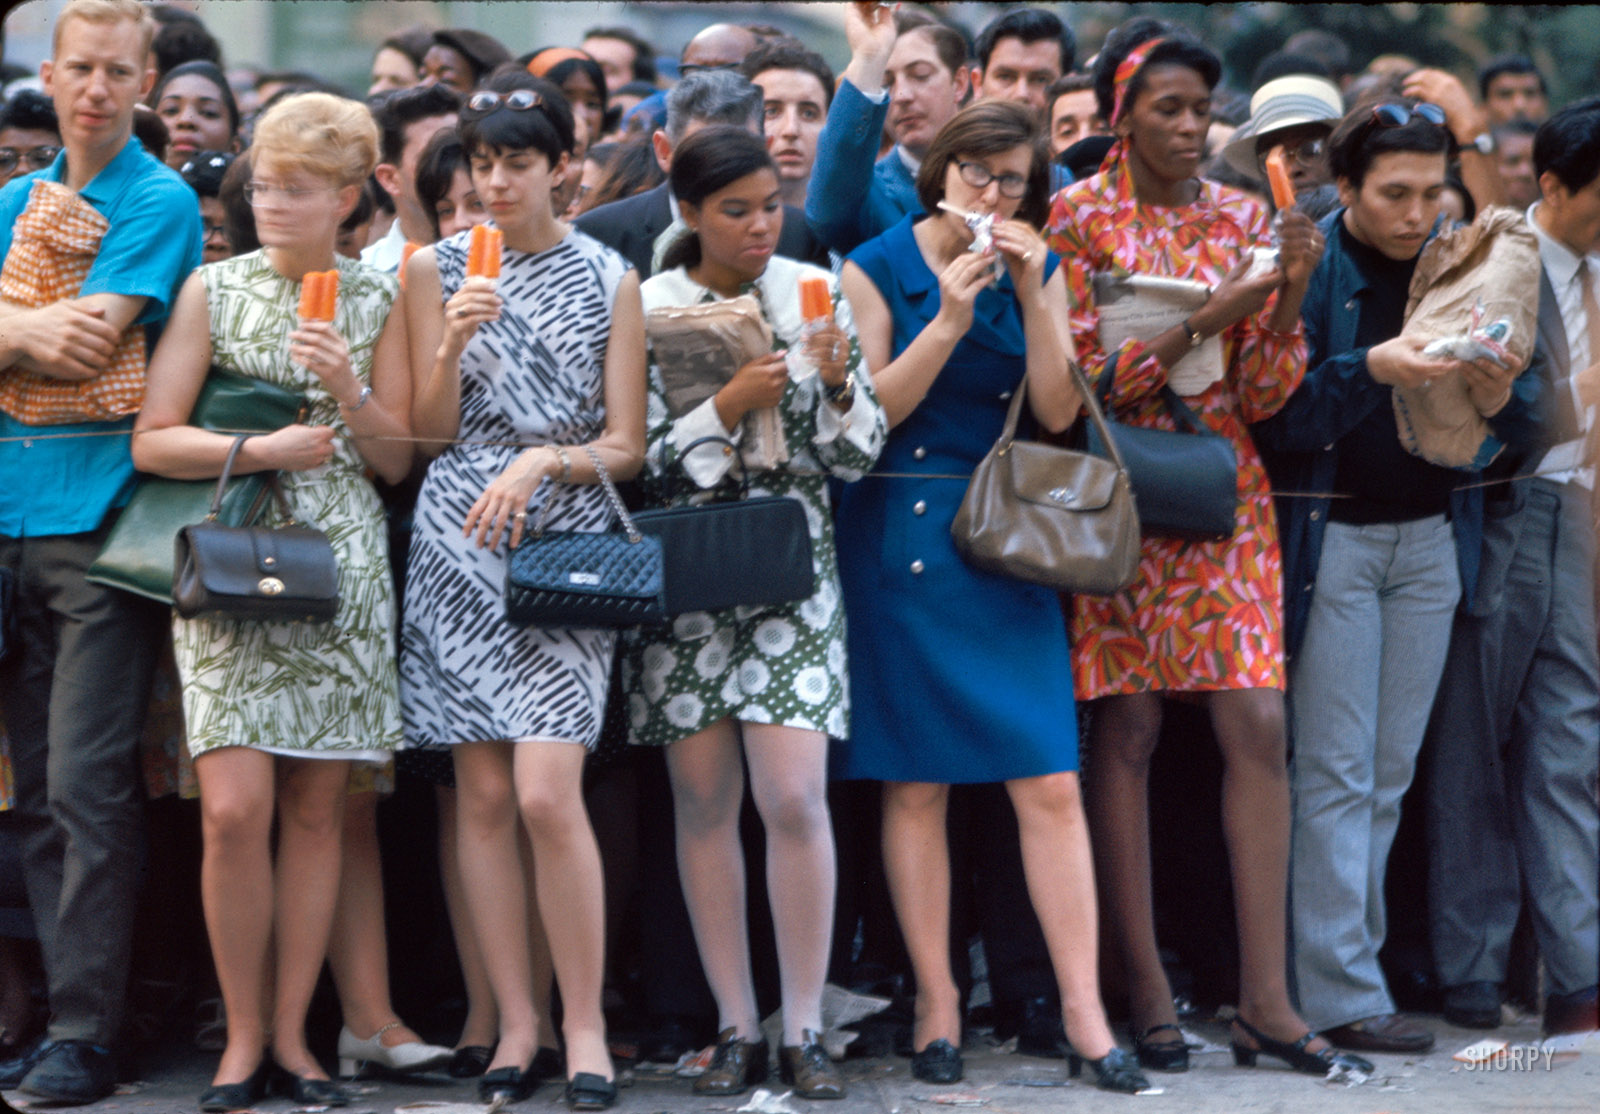 June 8, 1968. "Funeral cortege of Robert F. Kennedy." More of the mourners who lined the route of RFK's funeral train as it made its way from New York to Washington. The mood may have been blue, but the Popsicles were not. Photos by Paul Fusco and Thomas Koeniges for Look magazine. View full size.